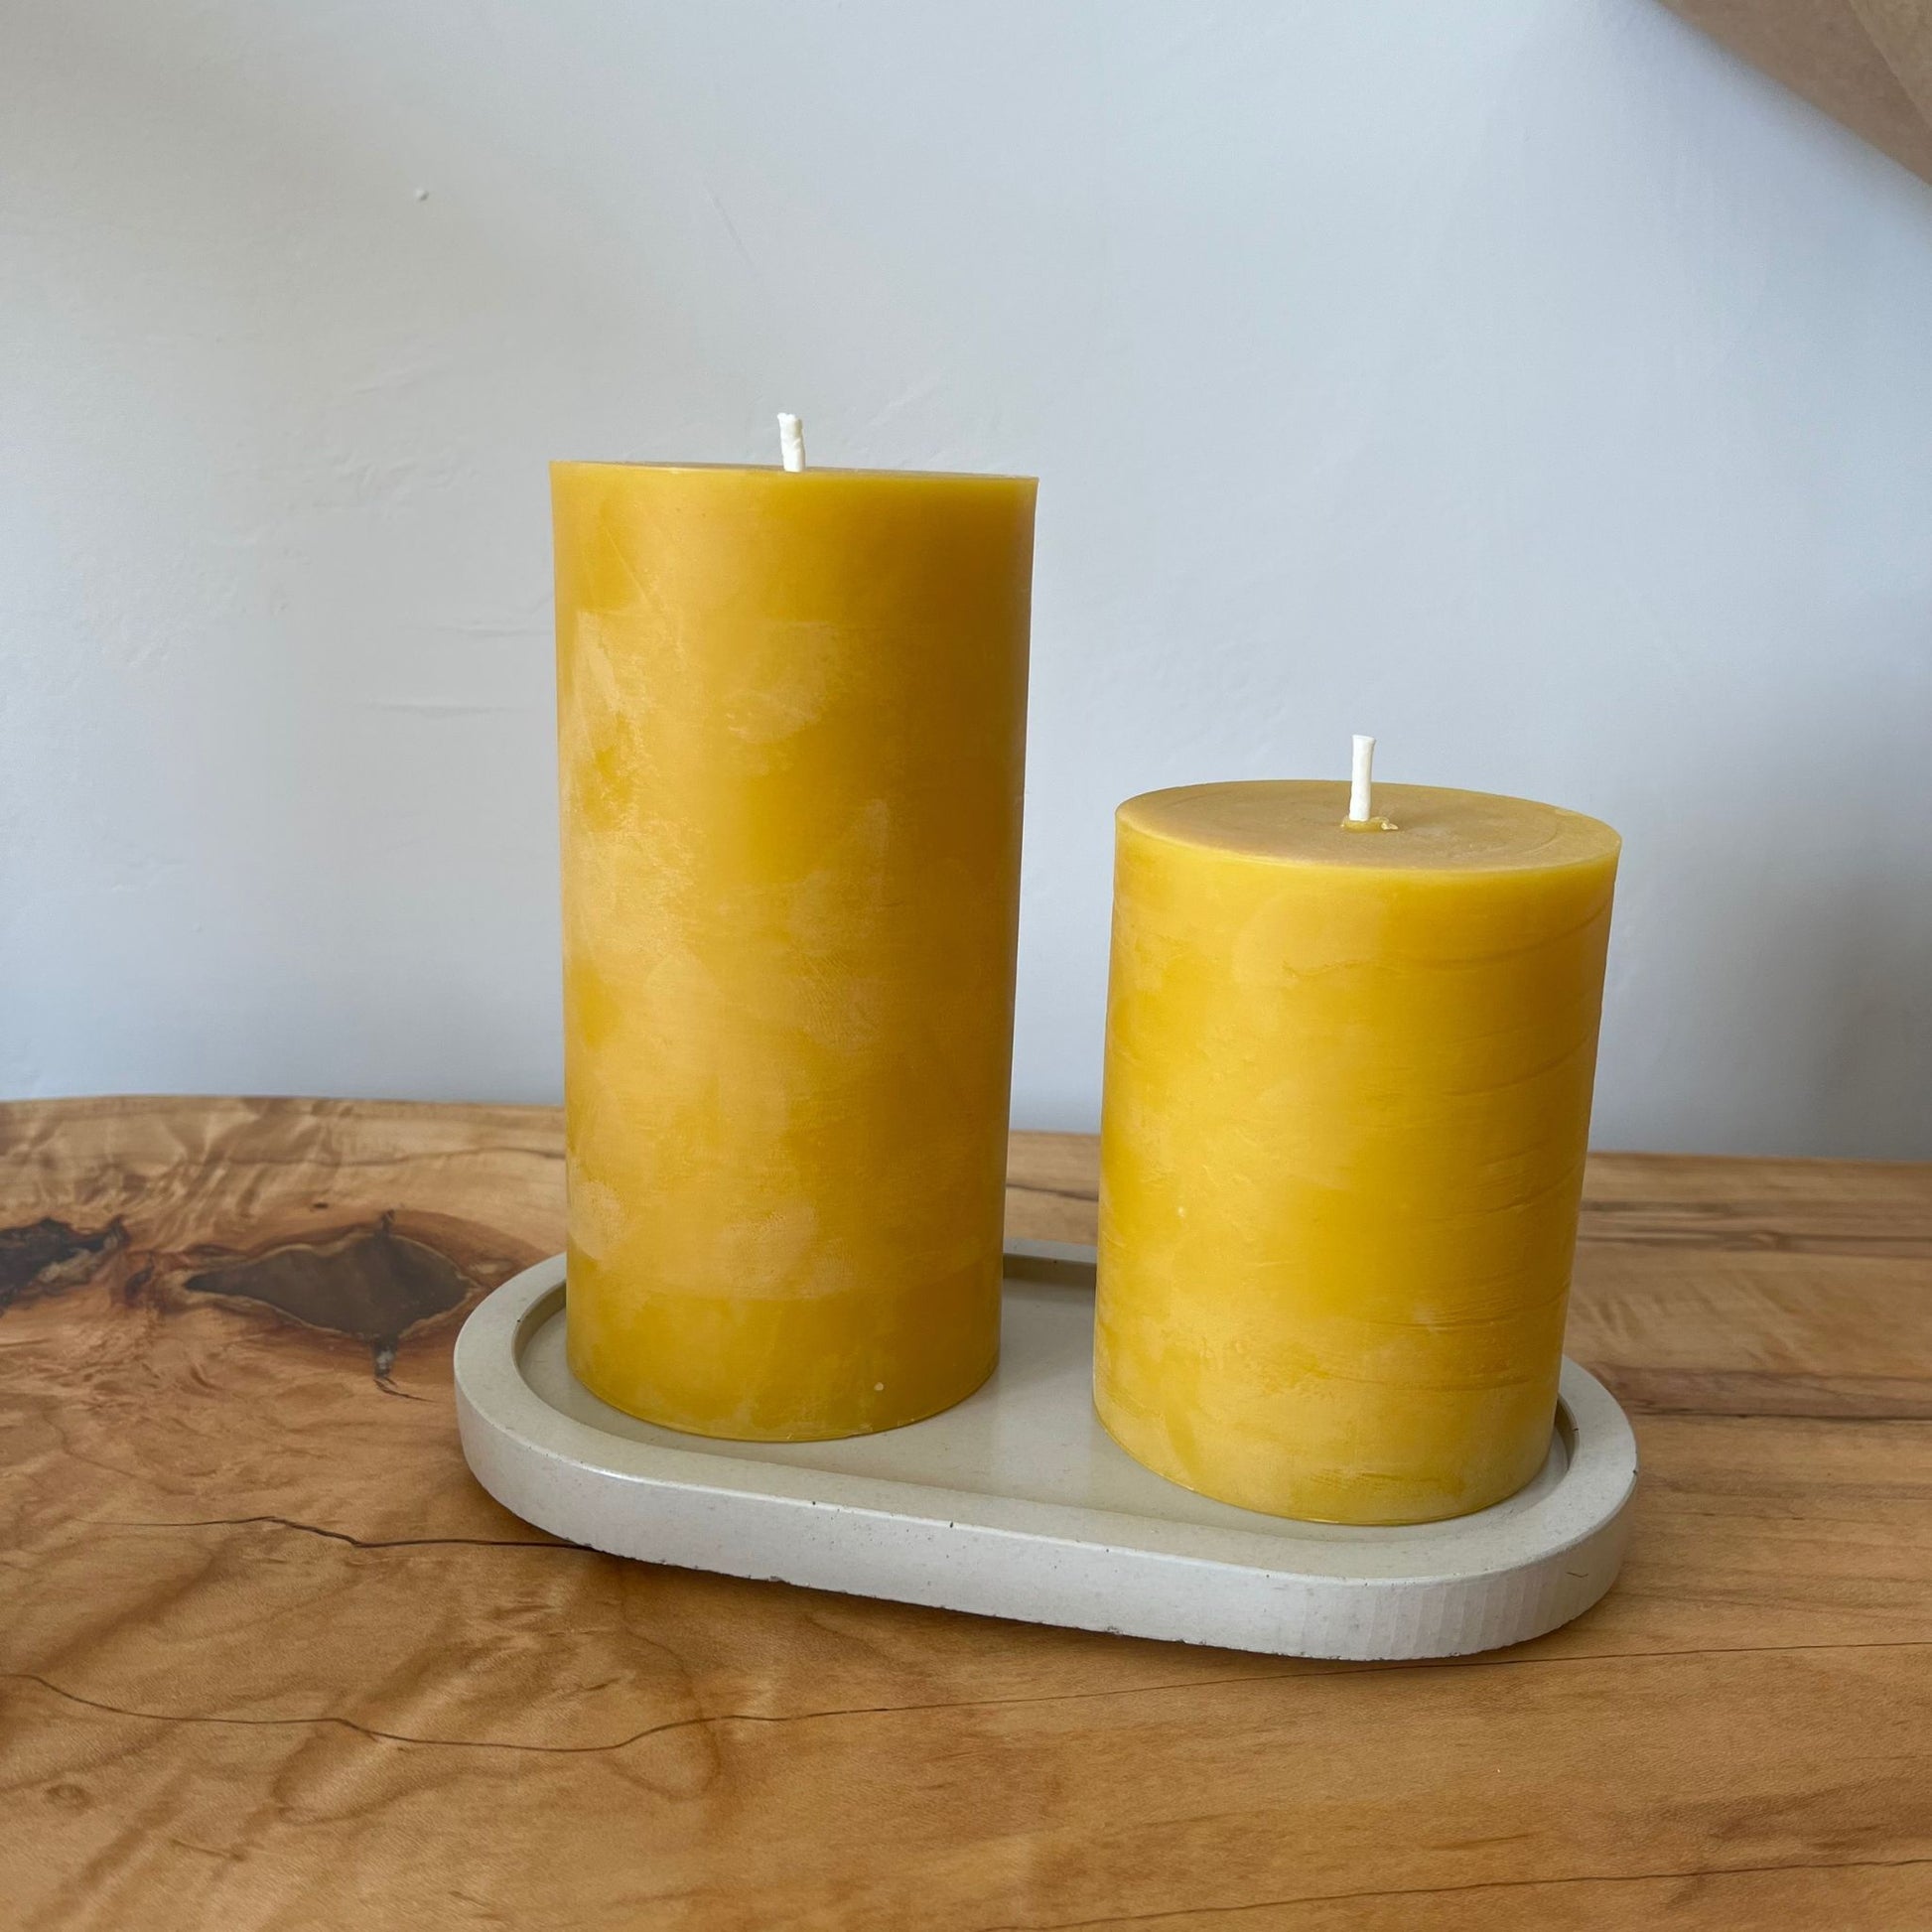 4 inch beeswax candle on a ceramic plate next to a bigger candle